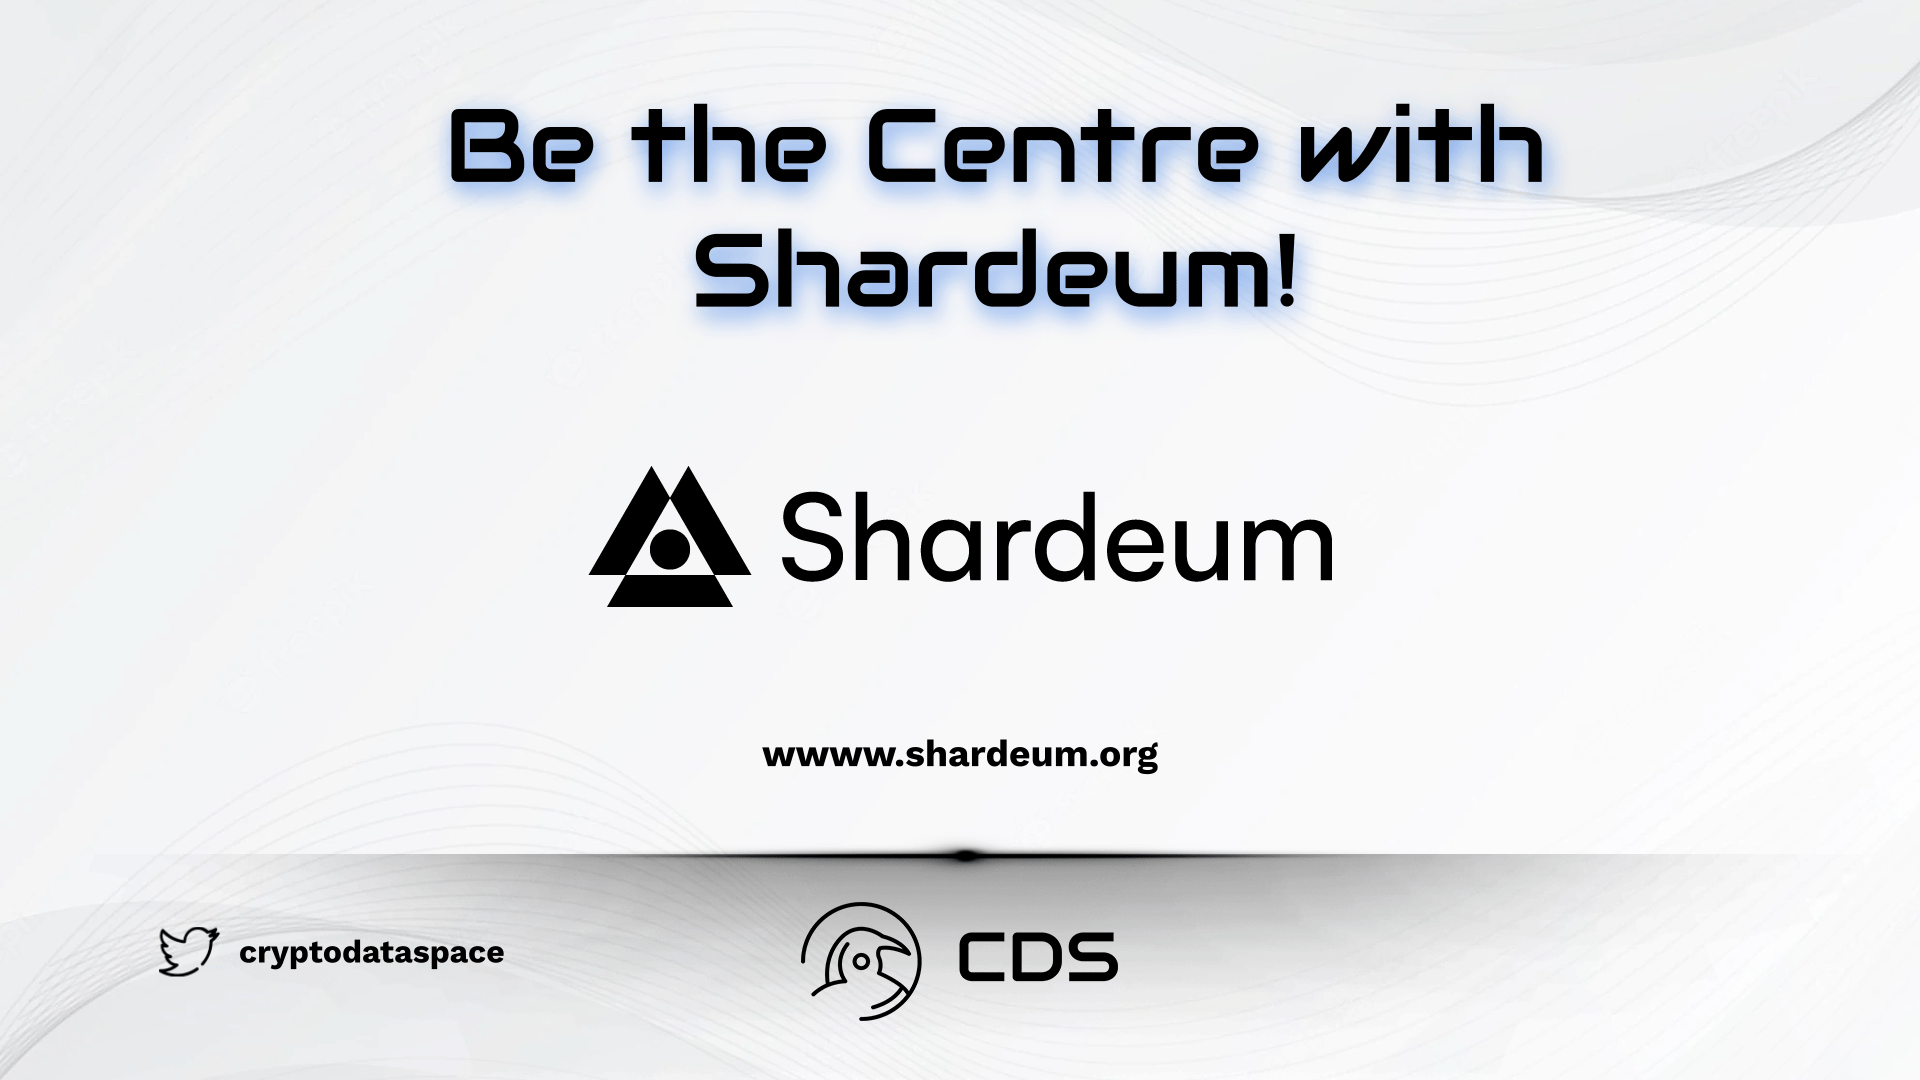 Be the Centre with Shardeum!